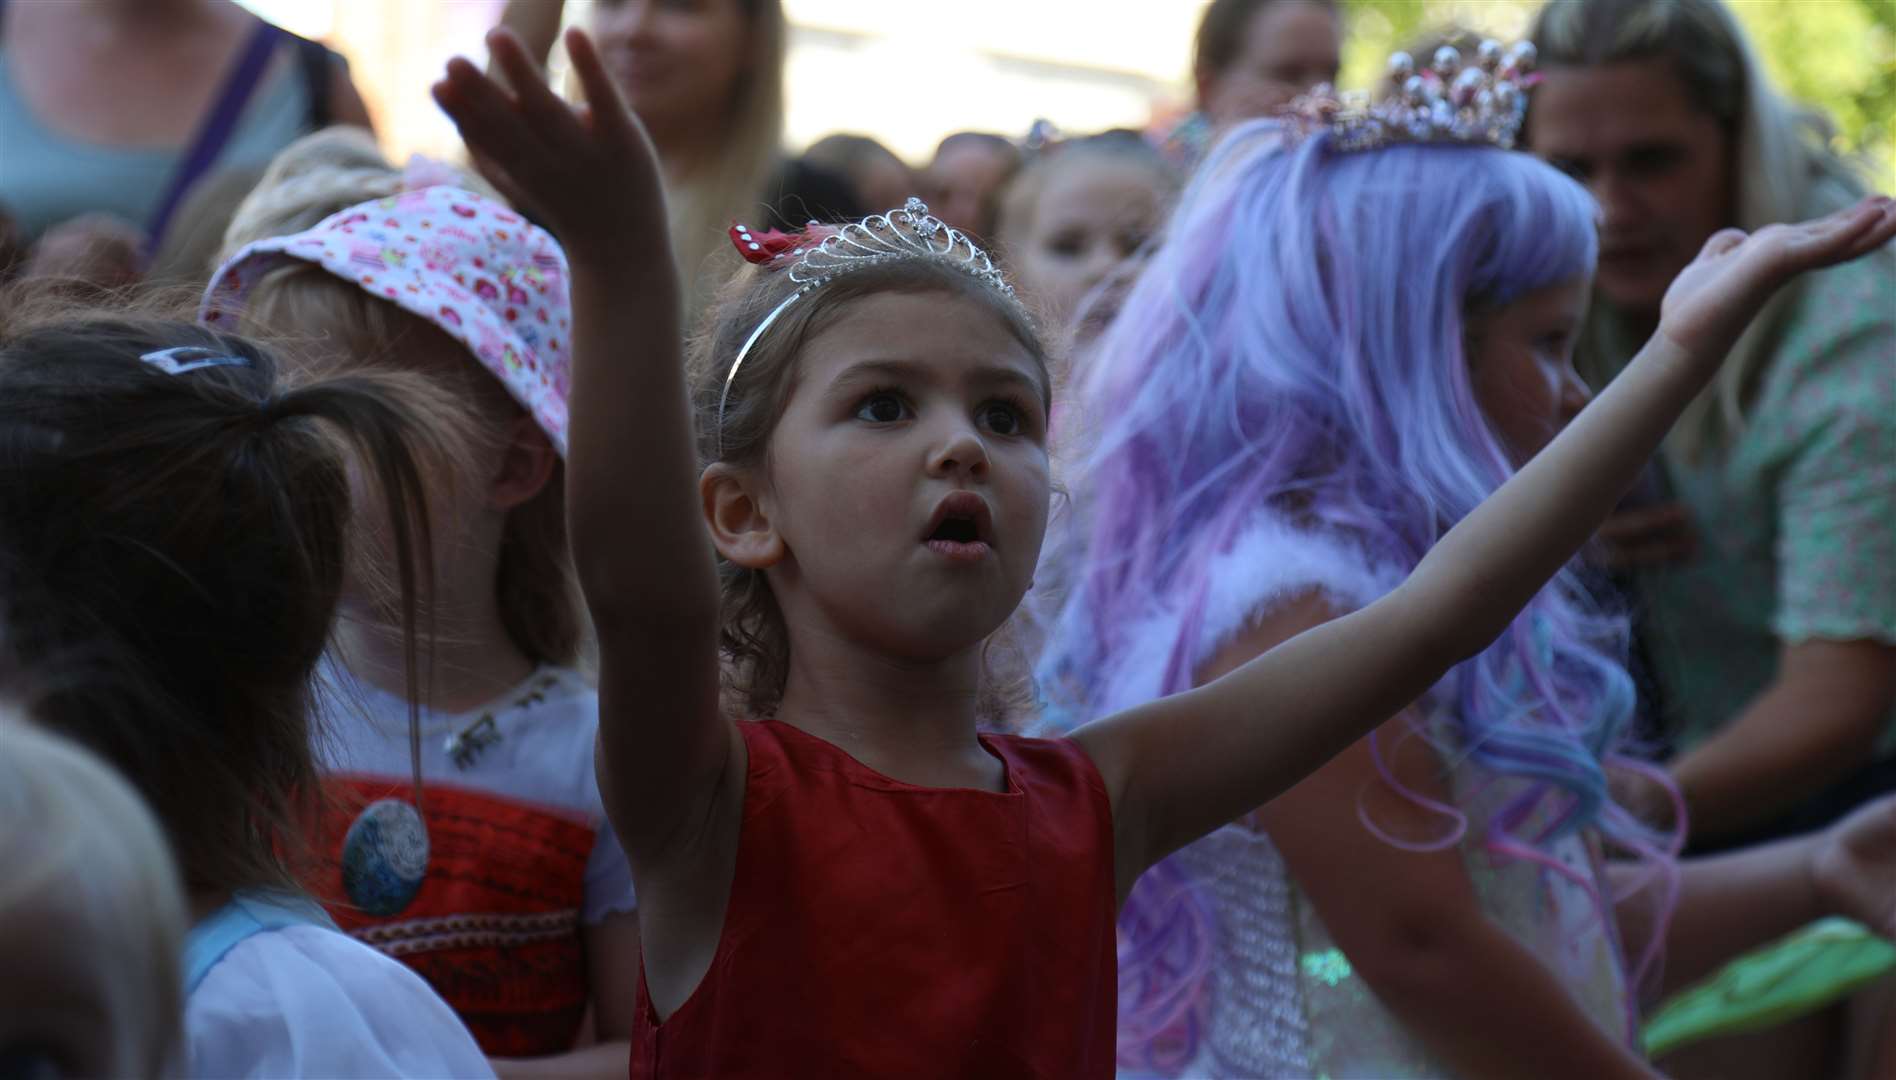 Children enjoyed the live singing, dancing and music. Picture: Jasmine Morris